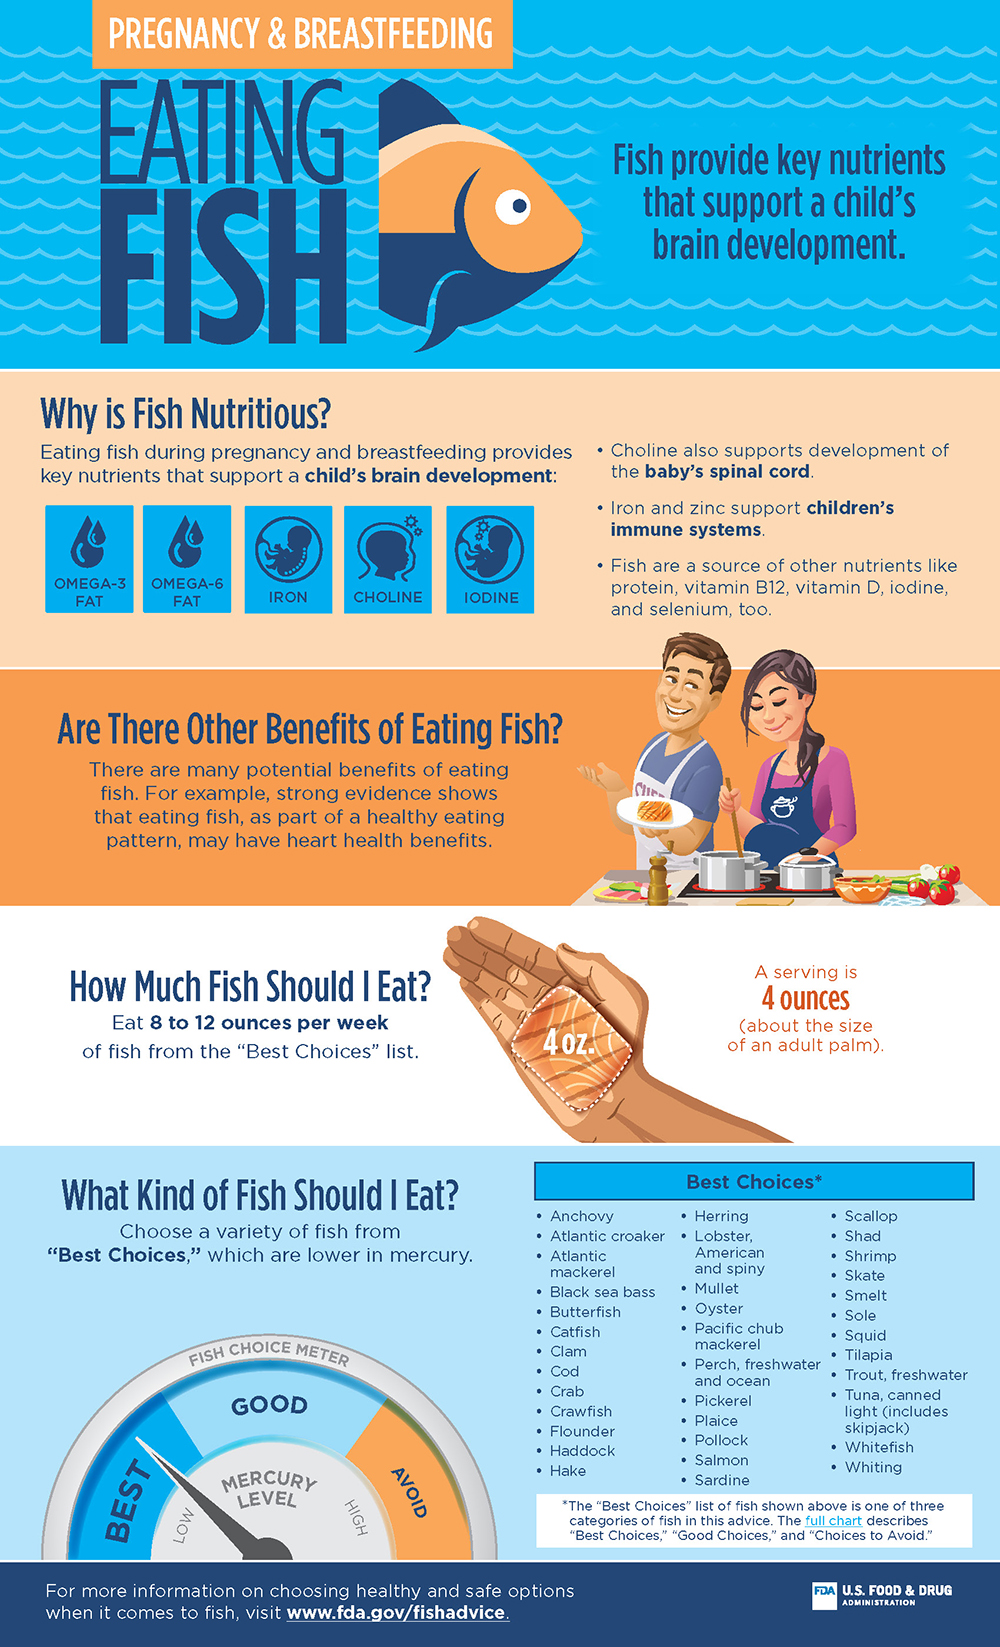 Infographic on Eating Fish for Pregnancy and Breastfeeding  (JPG)